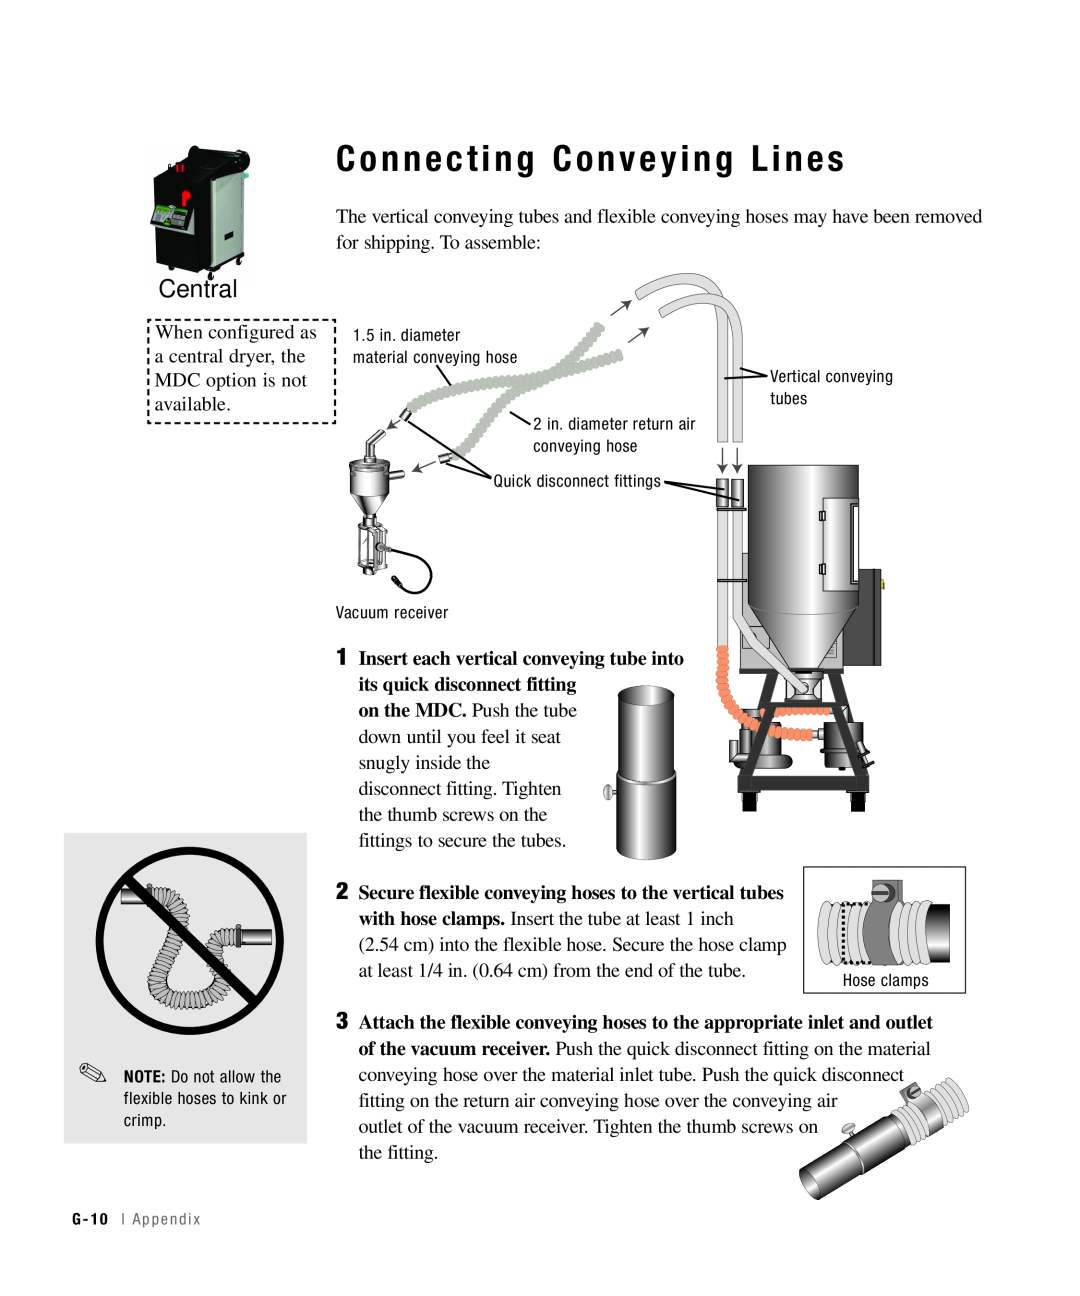 Conair 25, 15, 50 Connecting Conveying Lines, Central, 1.5 in. diameter material conveying hose, Vertical conveying, crimp 